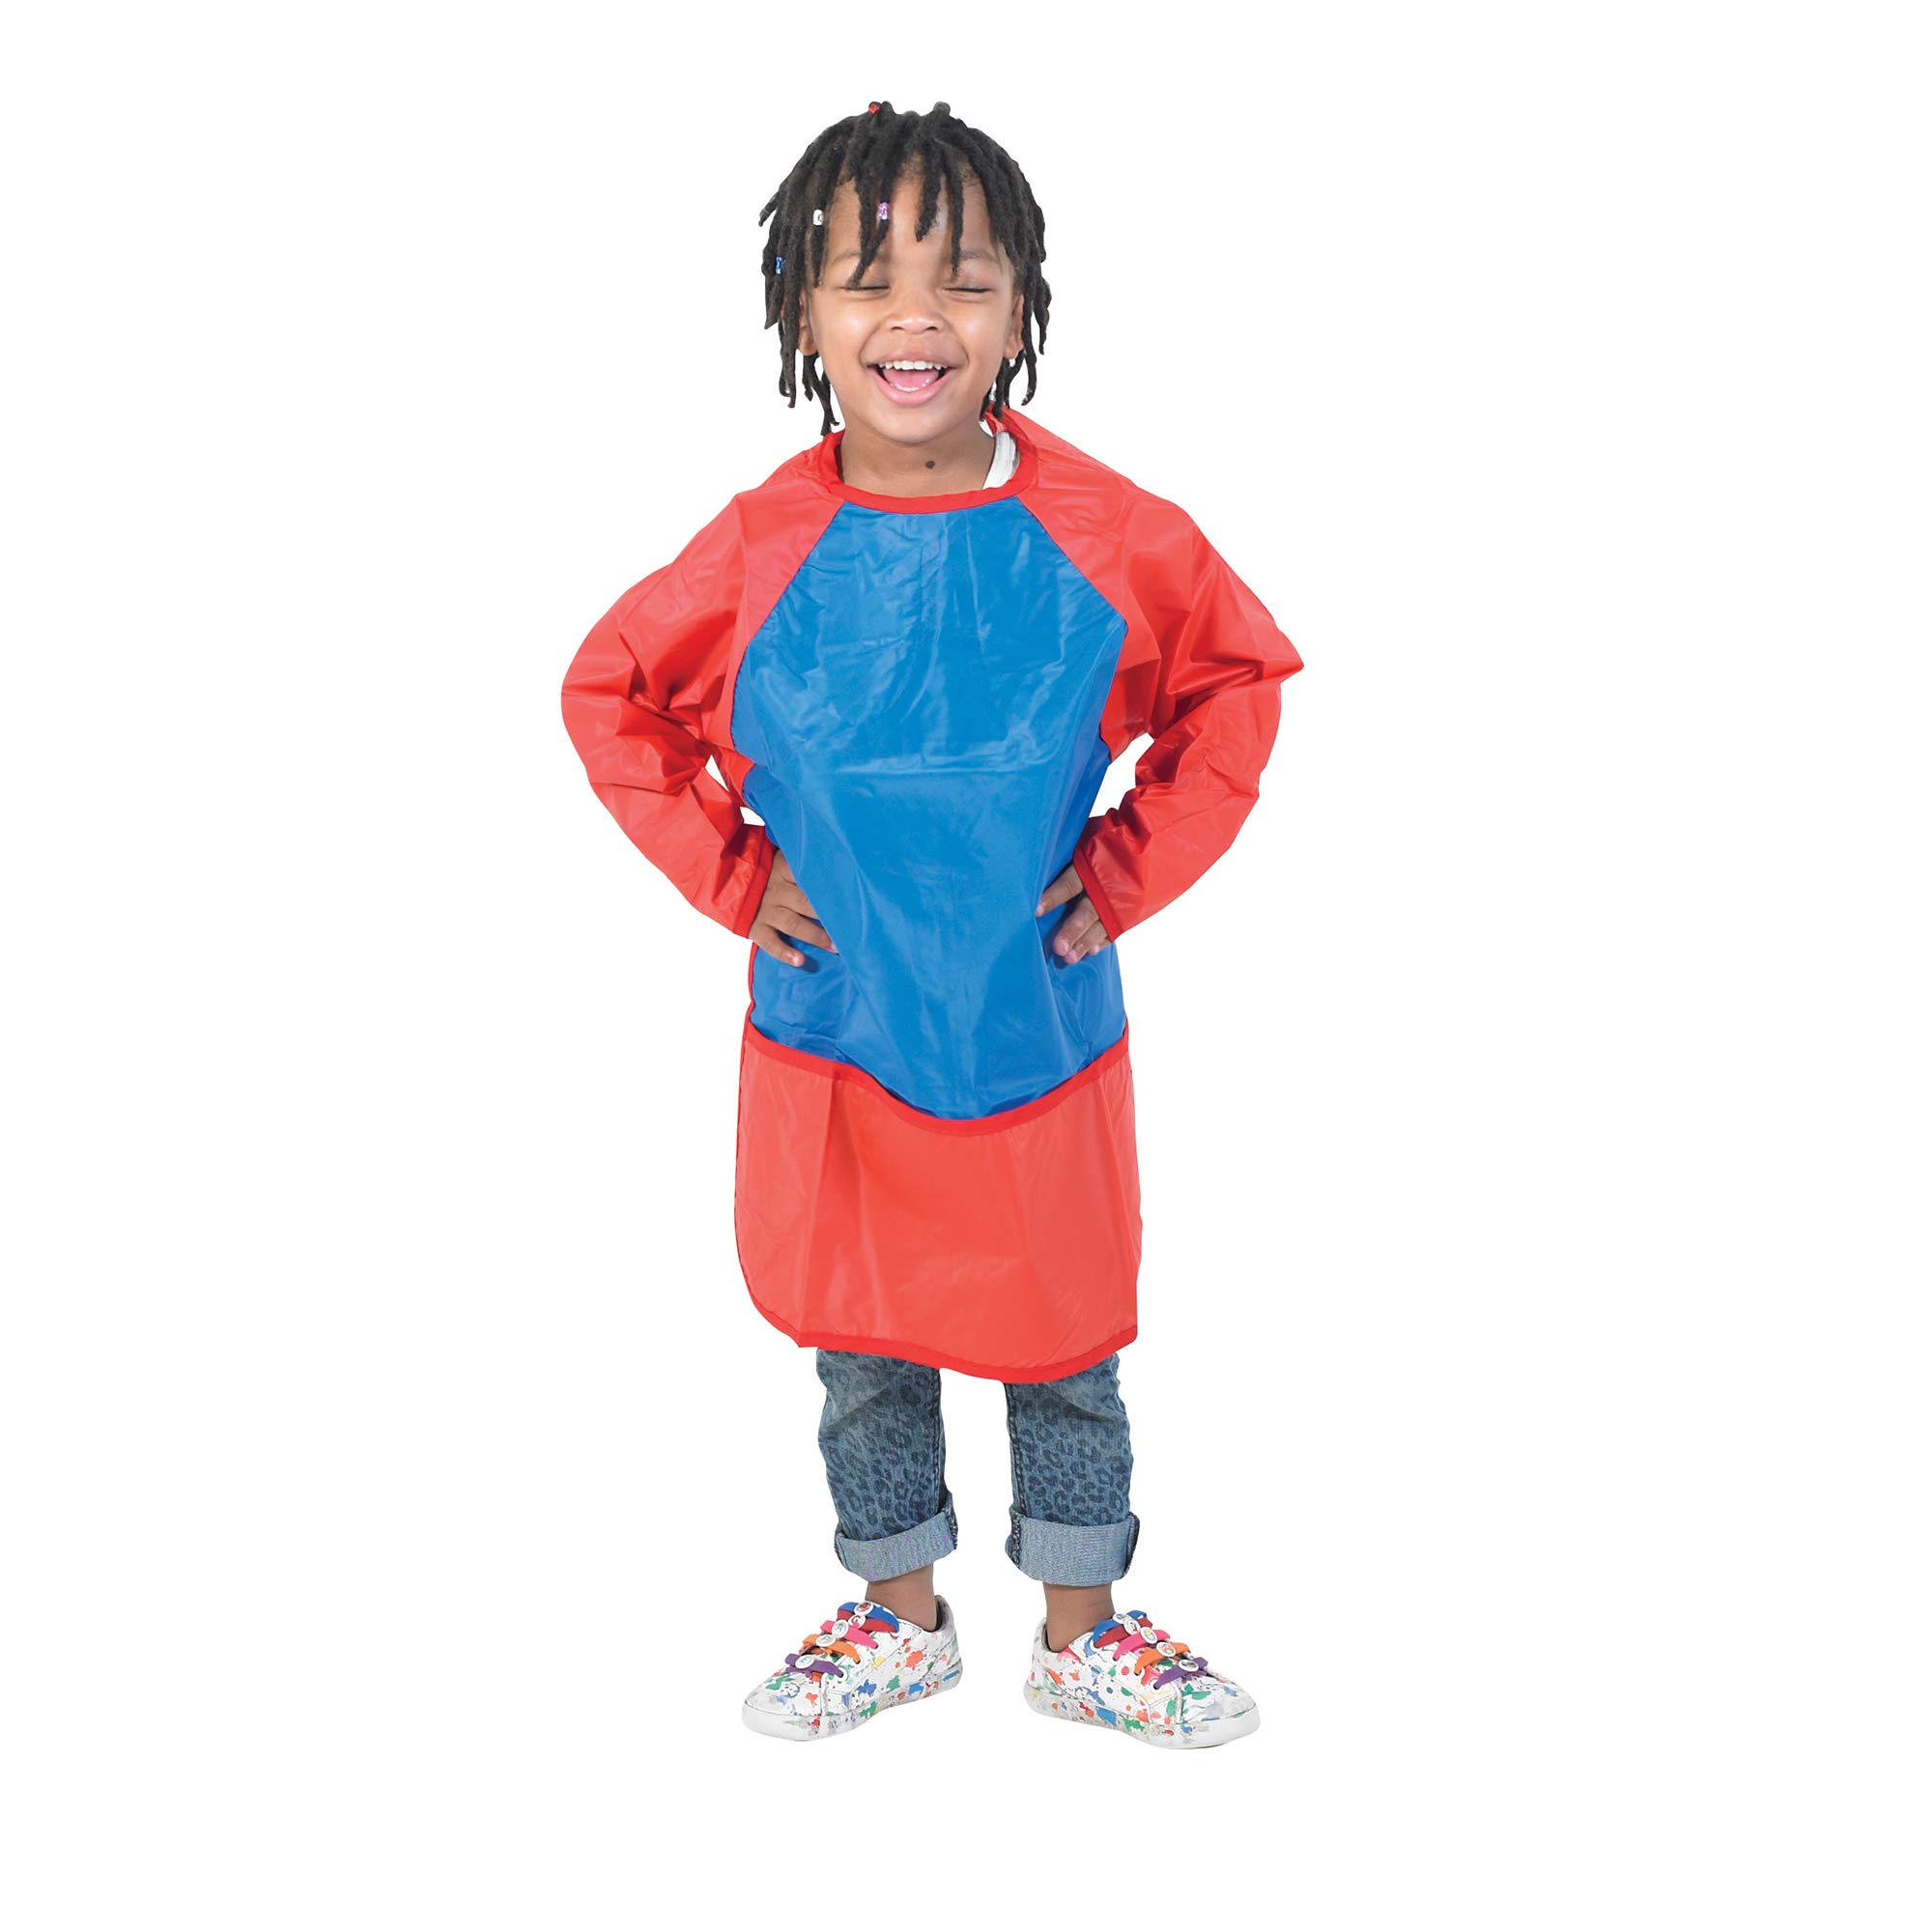 Children's Factory Medium Washable Smock, Classroom Painting & Art Smock for Kids & Toddlers, Ideal for Preschools/Homeschools/Playrooms/Daycares